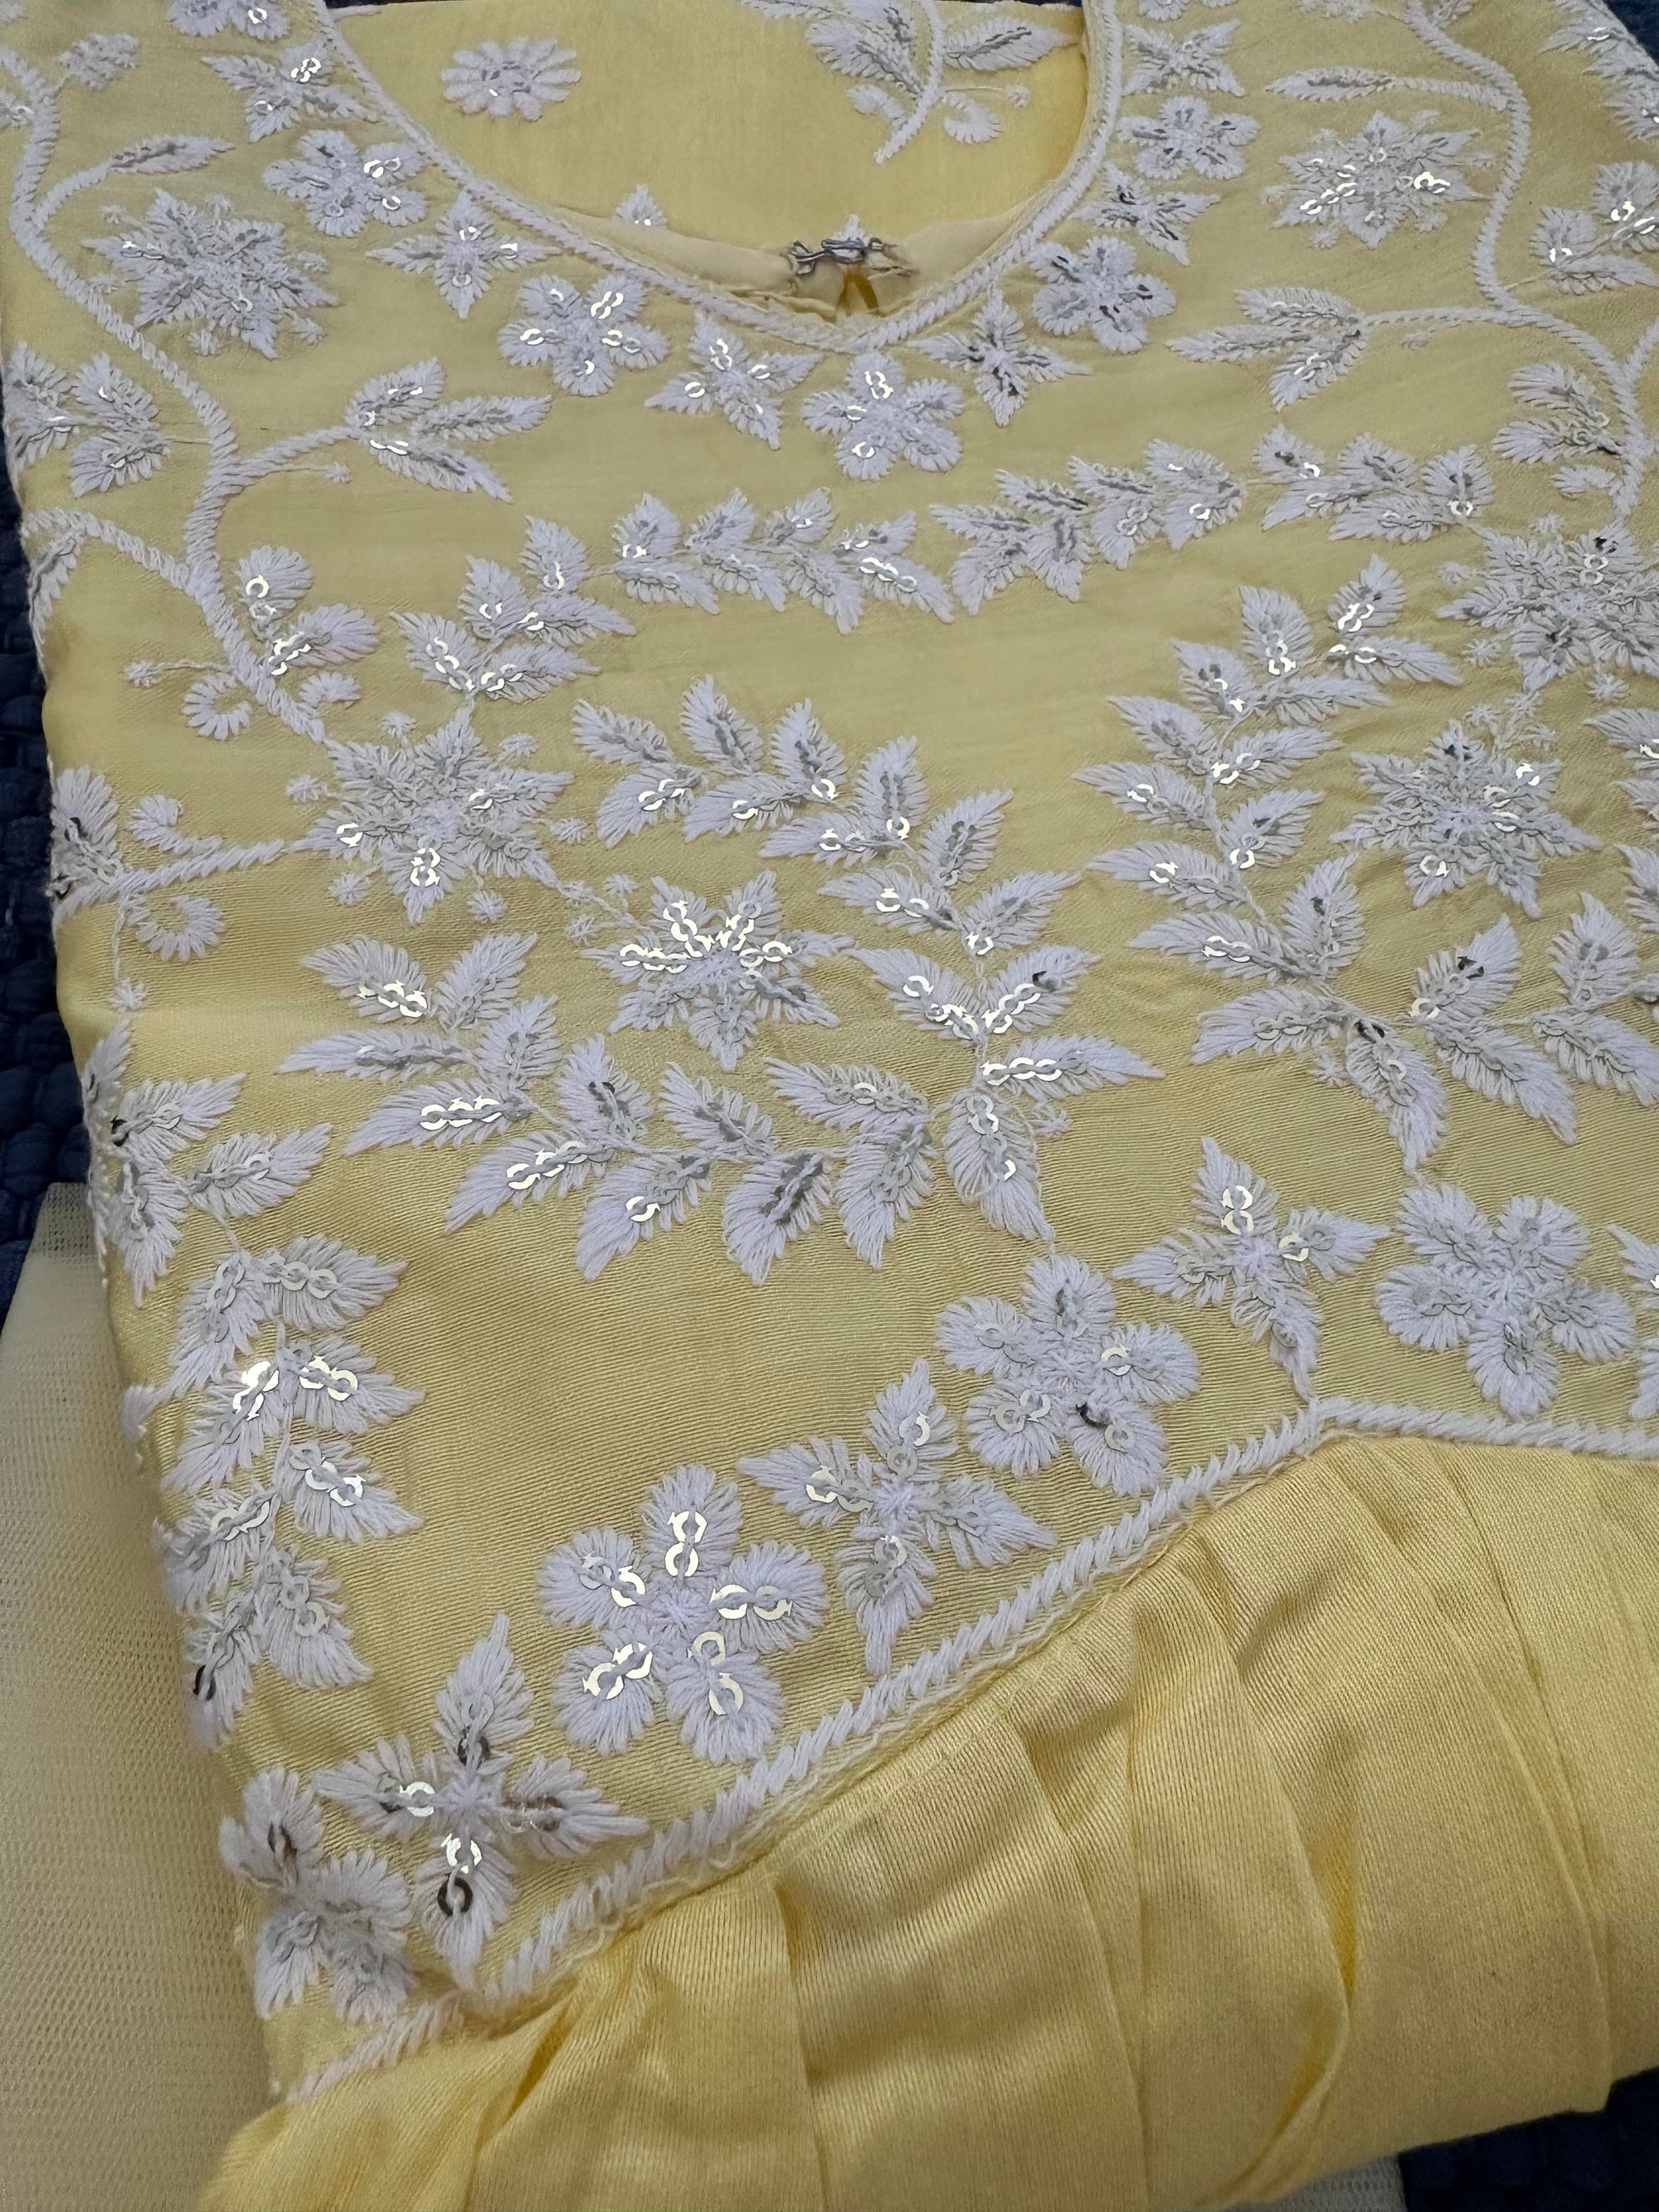 Cotton Chikankari Embroidery  Yellow 3 Piece Stylish Set with Sequence work for Girls, Design G- 1255